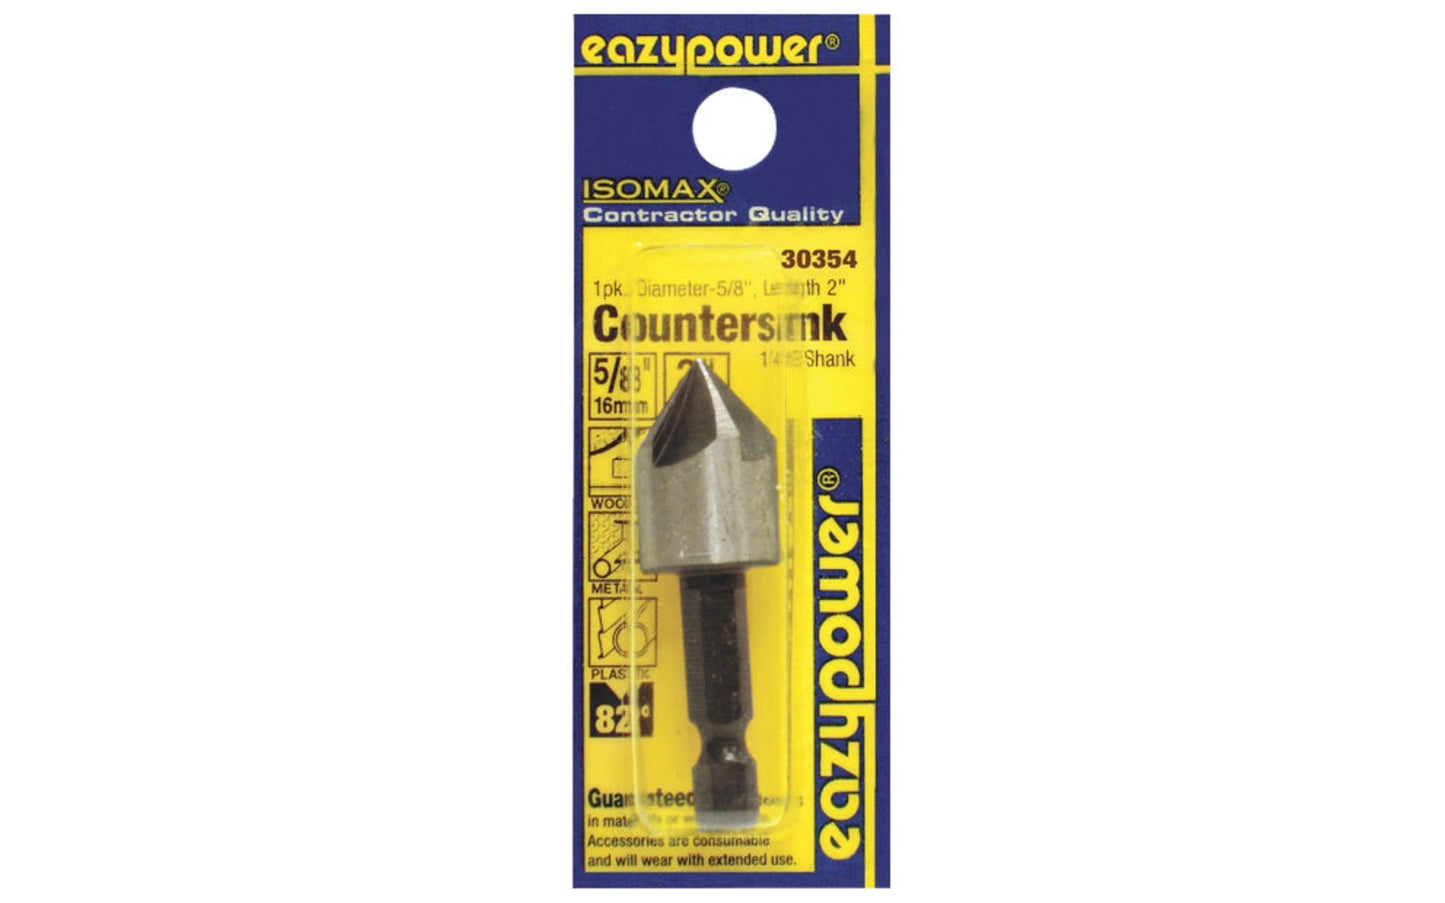 Eazypower 5/8" Countersink HSS bit with hex shank. Countersink, deburr, & chamfer holes in soft metals & wood. Five cutting flutes. 1/4" hex quickchange shank bit. 82° cutting angle head. High Speed Steel - 2" overall length of countersink bit. 083771303549. Eazypower Isomax Model 30354